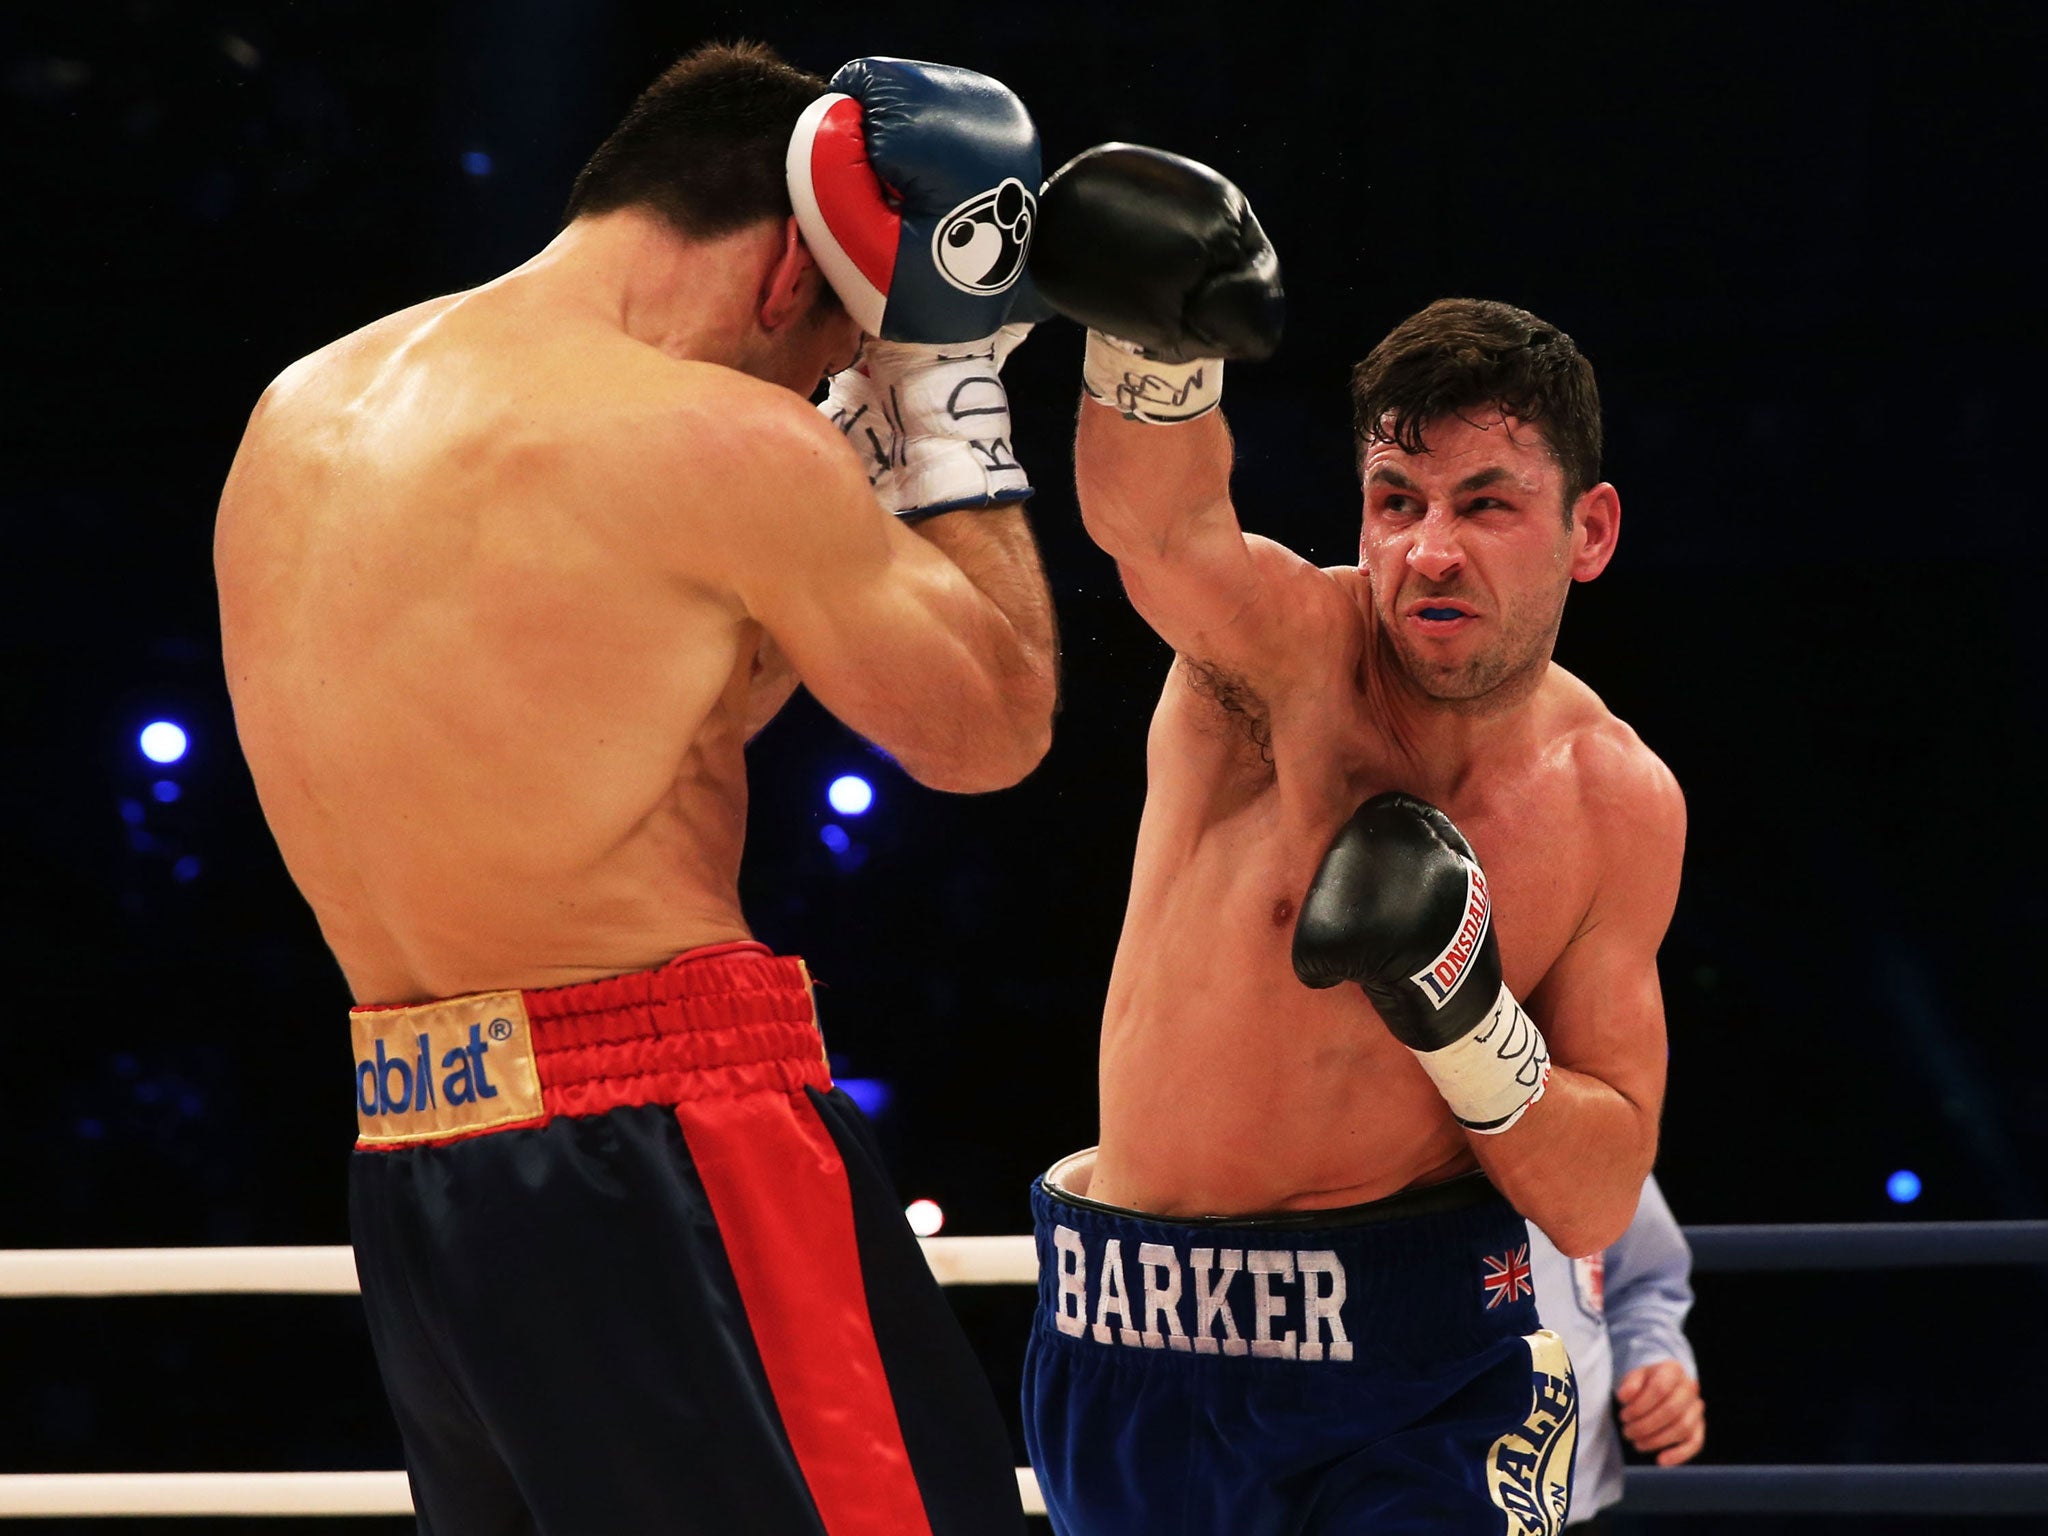 Darren Barker has announced his retirement from boxing after suffering a hip injury in the defeat to Felix Sturm